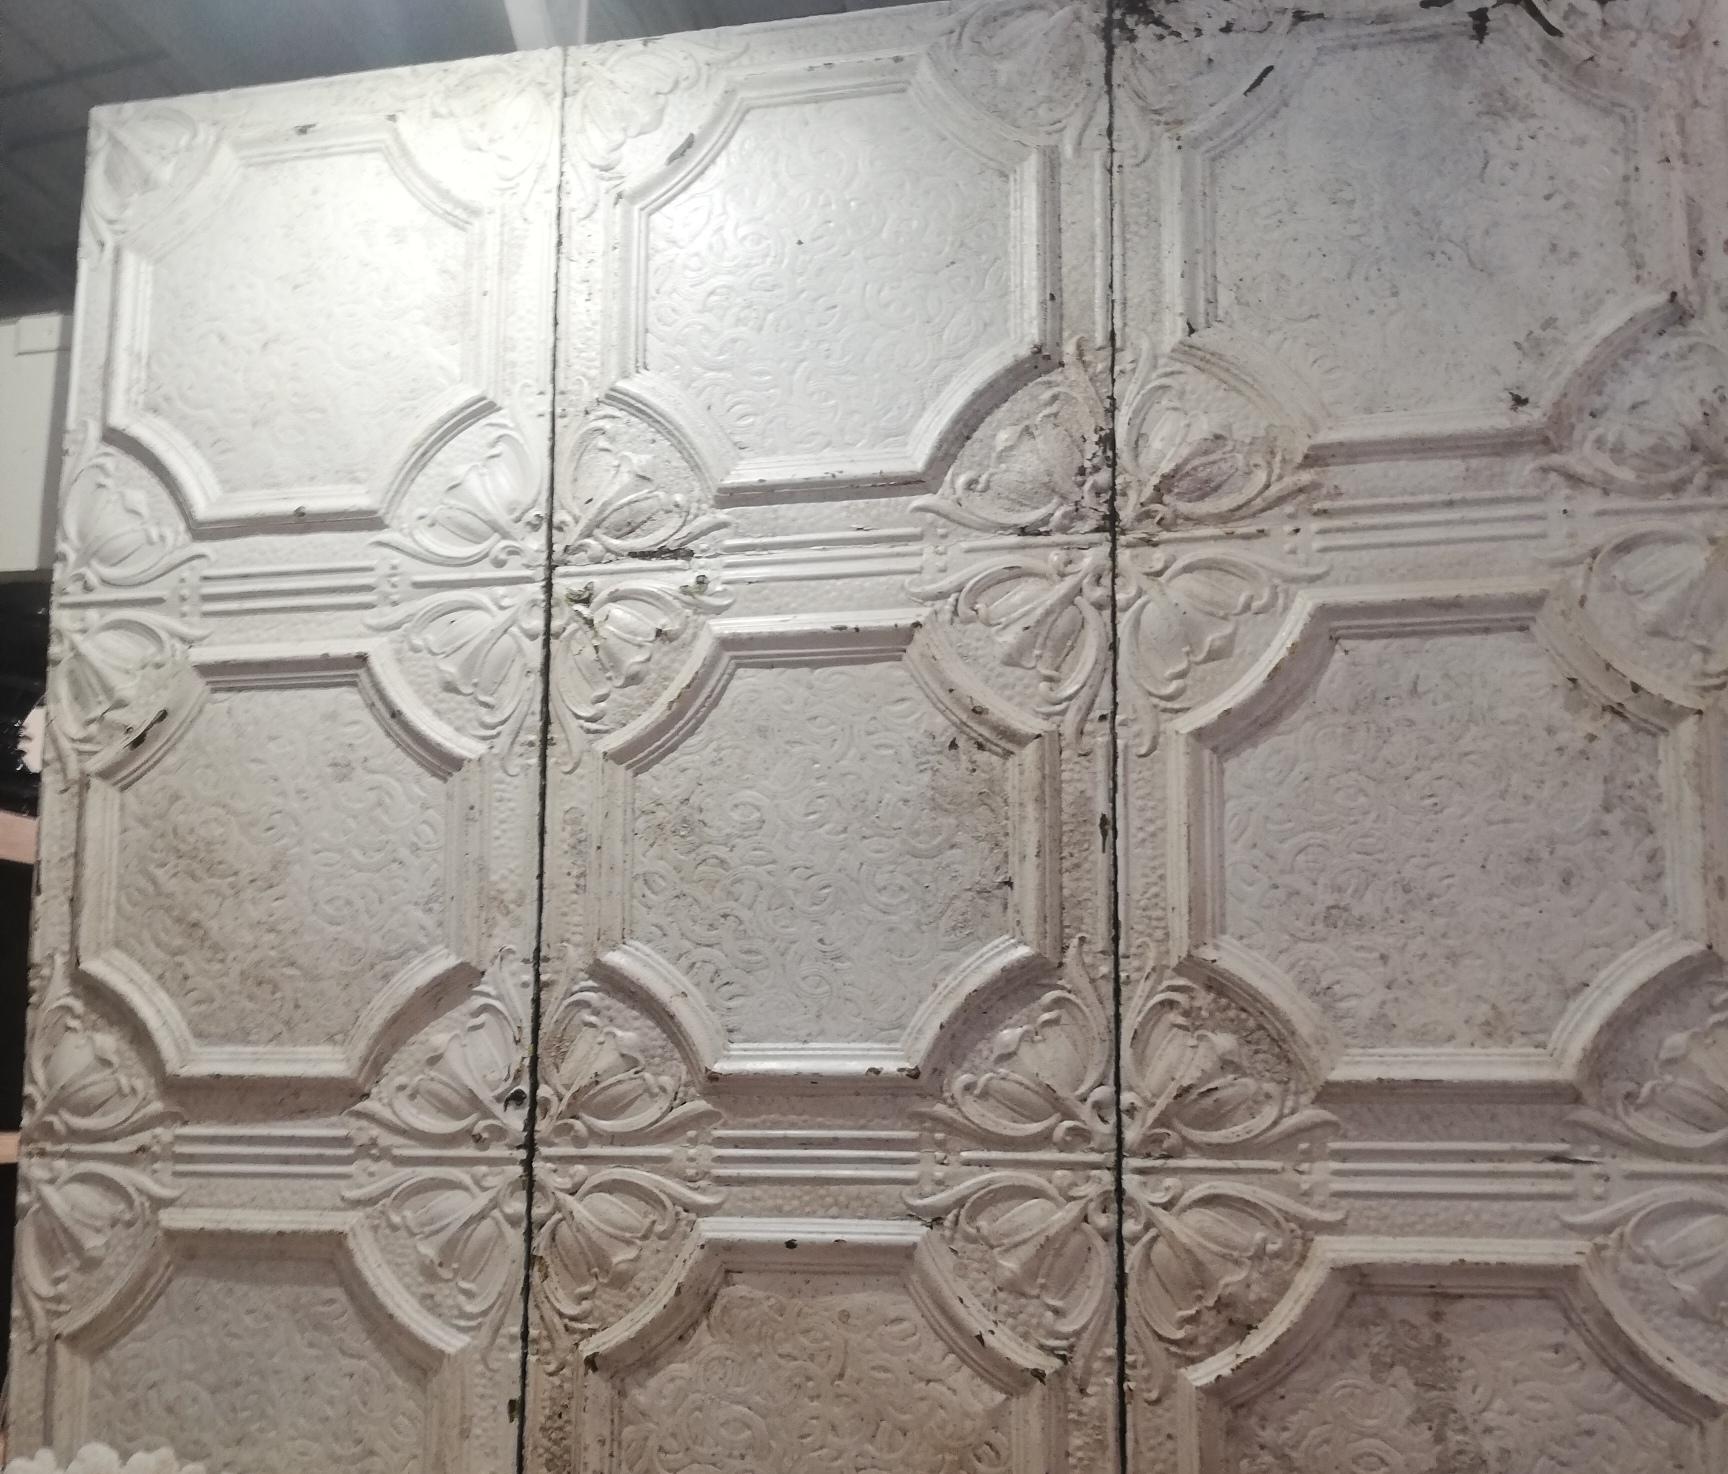 Antique set of 16 square meters of boiserie or ceiling panels, in white lacquered sheet metal, hand-embossed with typical tiles of the time, each panel measures 60 cm x 180 cm and has 3 joined panels. Produced for home in the late 19th century, in